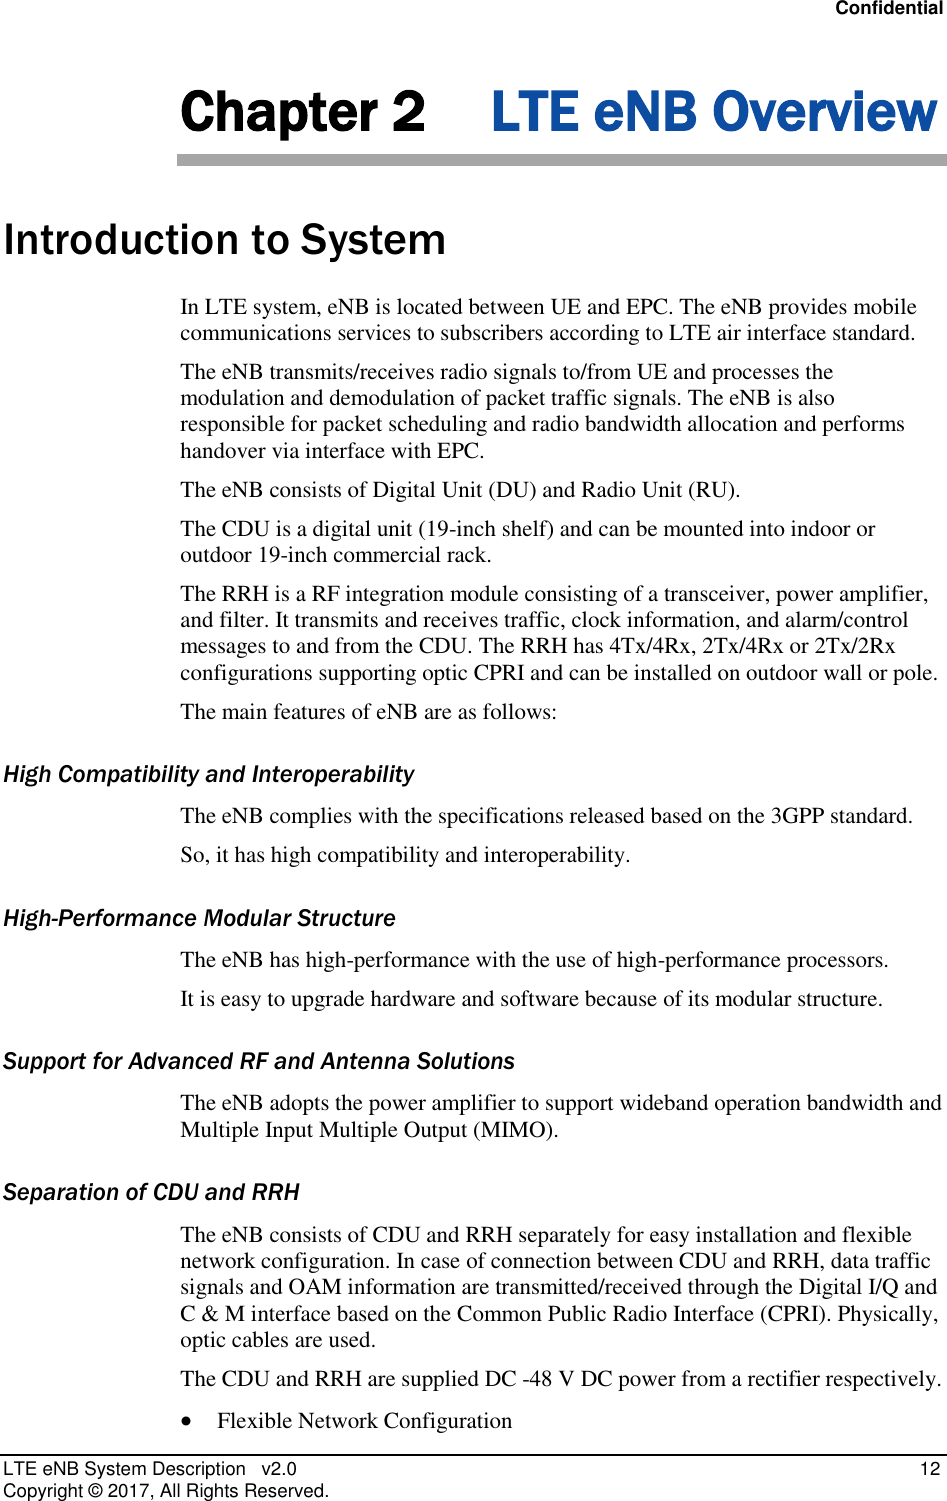 Confidential LTE eNB System Description   v2.0   12 Copyright ©  2017, All Rights Reserved. Chapter 2 LTE eNB Overview Introduction to System In LTE system, eNB is located between UE and EPC. The eNB provides mobile communications services to subscribers according to LTE air interface standard. The eNB transmits/receives radio signals to/from UE and processes the modulation and demodulation of packet traffic signals. The eNB is also responsible for packet scheduling and radio bandwidth allocation and performs handover via interface with EPC. The eNB consists of Digital Unit (DU) and Radio Unit (RU). The CDU is a digital unit (19-inch shelf) and can be mounted into indoor or outdoor 19-inch commercial rack. The RRH is a RF integration module consisting of a transceiver, power amplifier, and filter. It transmits and receives traffic, clock information, and alarm/control messages to and from the CDU. The RRH has 4Tx/4Rx, 2Tx/4Rx or 2Tx/2Rx configurations supporting optic CPRI and can be installed on outdoor wall or pole. The main features of eNB are as follows: High Compatibility and Interoperability The eNB complies with the specifications released based on the 3GPP standard.  So, it has high compatibility and interoperability. High-Performance Modular Structure The eNB has high-performance with the use of high-performance processors. It is easy to upgrade hardware and software because of its modular structure. Support for Advanced RF and Antenna Solutions The eNB adopts the power amplifier to support wideband operation bandwidth and Multiple Input Multiple Output (MIMO). Separation of CDU and RRH The eNB consists of CDU and RRH separately for easy installation and flexible network configuration. In case of connection between CDU and RRH, data traffic signals and OAM information are transmitted/received through the Digital I/Q and C &amp; M interface based on the Common Public Radio Interface (CPRI). Physically, optic cables are used. The CDU and RRH are supplied DC -48 V DC power from a rectifier respectively.  Flexible Network Configuration 